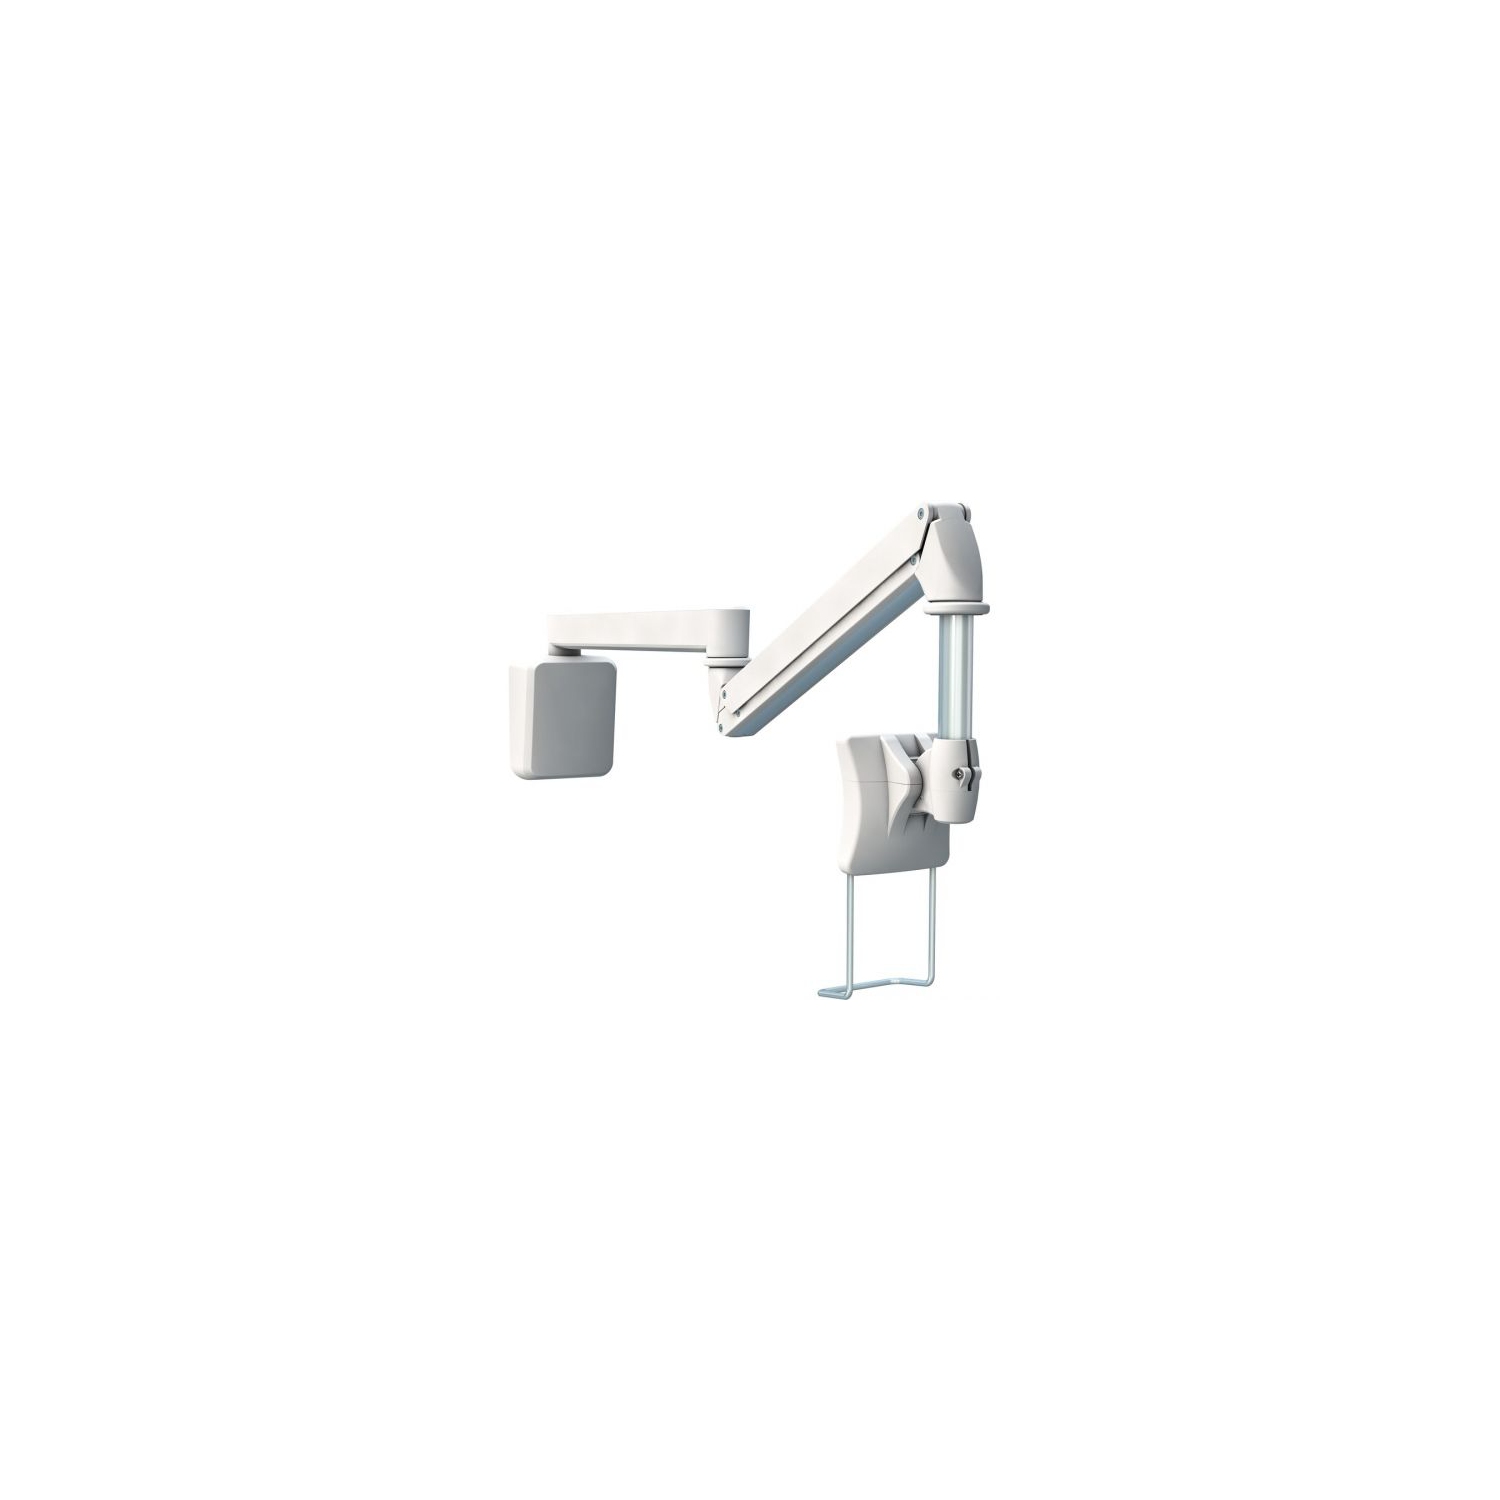 This articulating wall mount was designed for clinics, hospitals, medical facilities, doctor?s offices, nursing facilities,